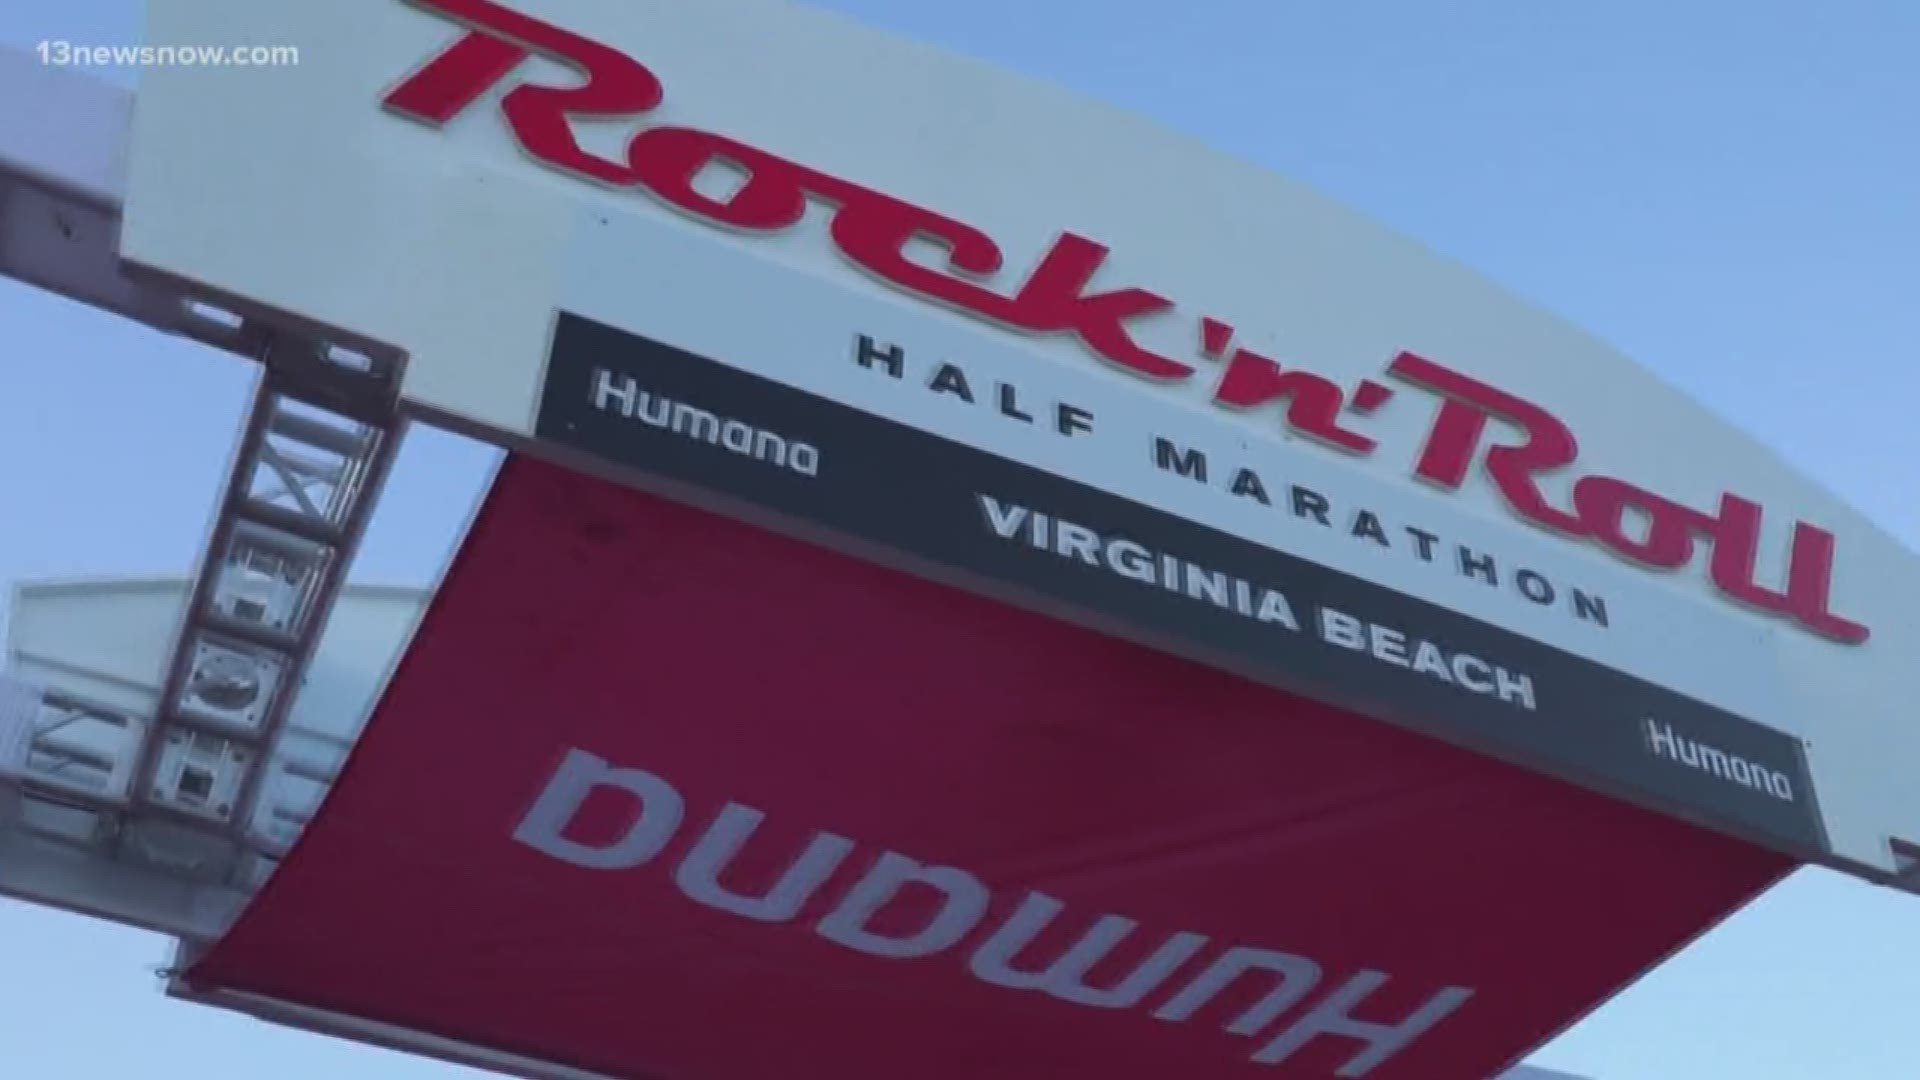 The Rock 'n' Roll Half Marathon is coming back to the Oceanfront. What makes the marathon so unique are the bands set up every mile to keep the runners motivated.